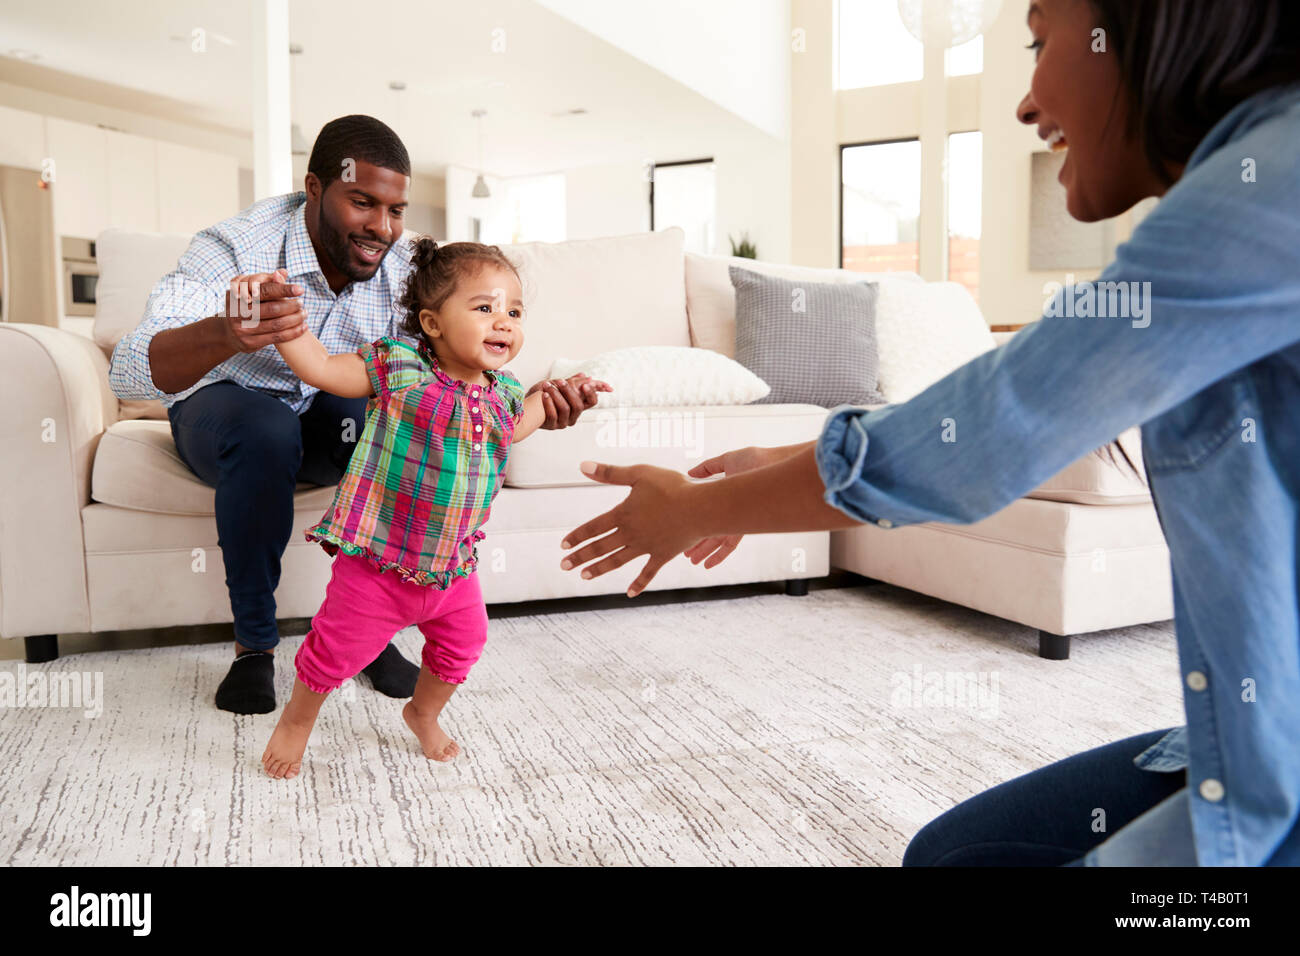 Family At Home Encouraging Baby Daughter To Take First Steps Stock Photo